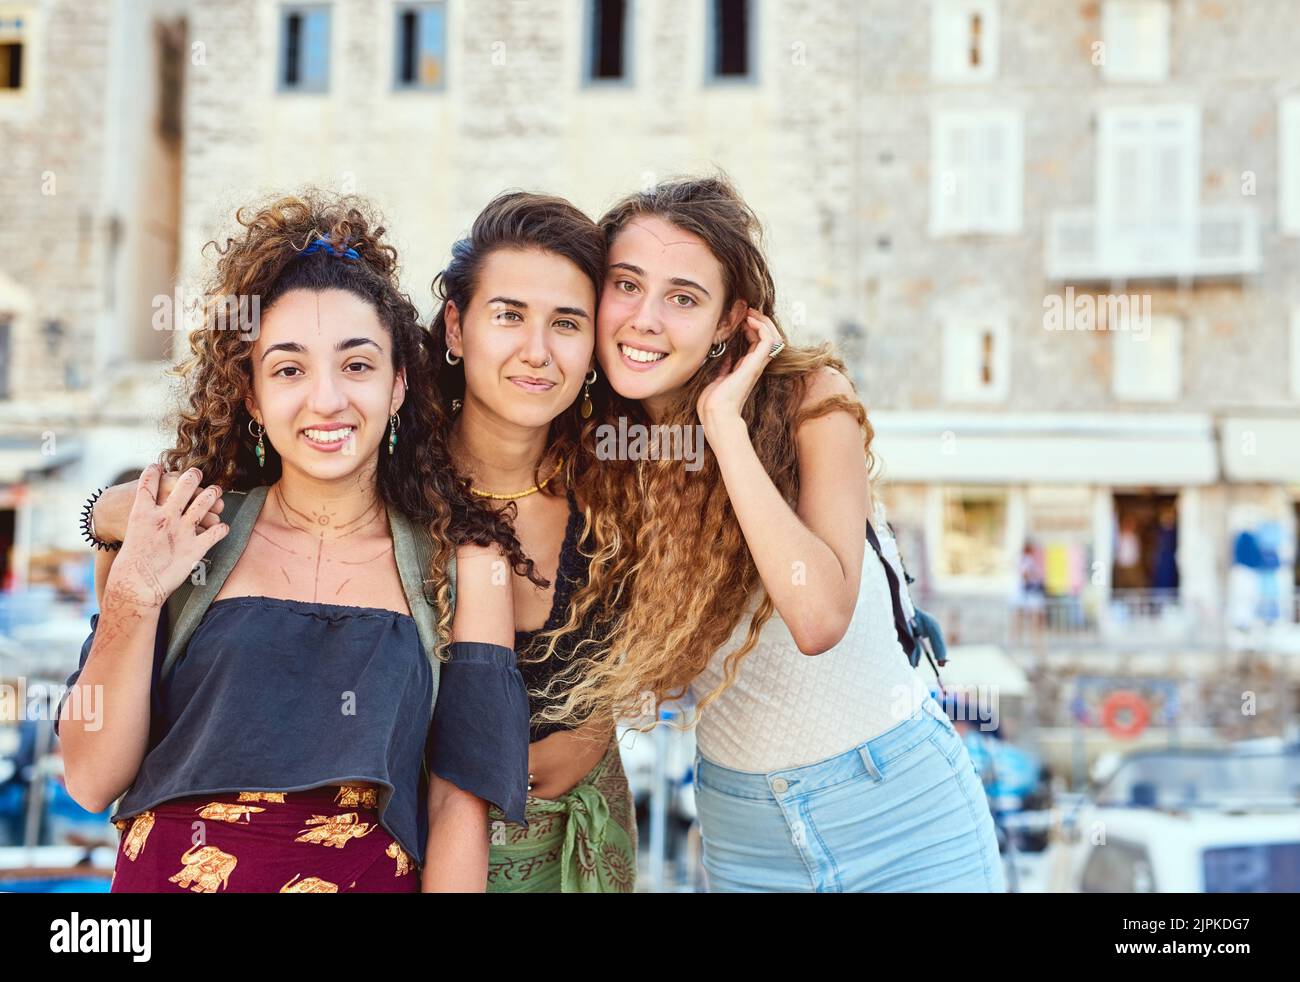 They make sight seeing even better. girlfriends on vacation. Stock Photo